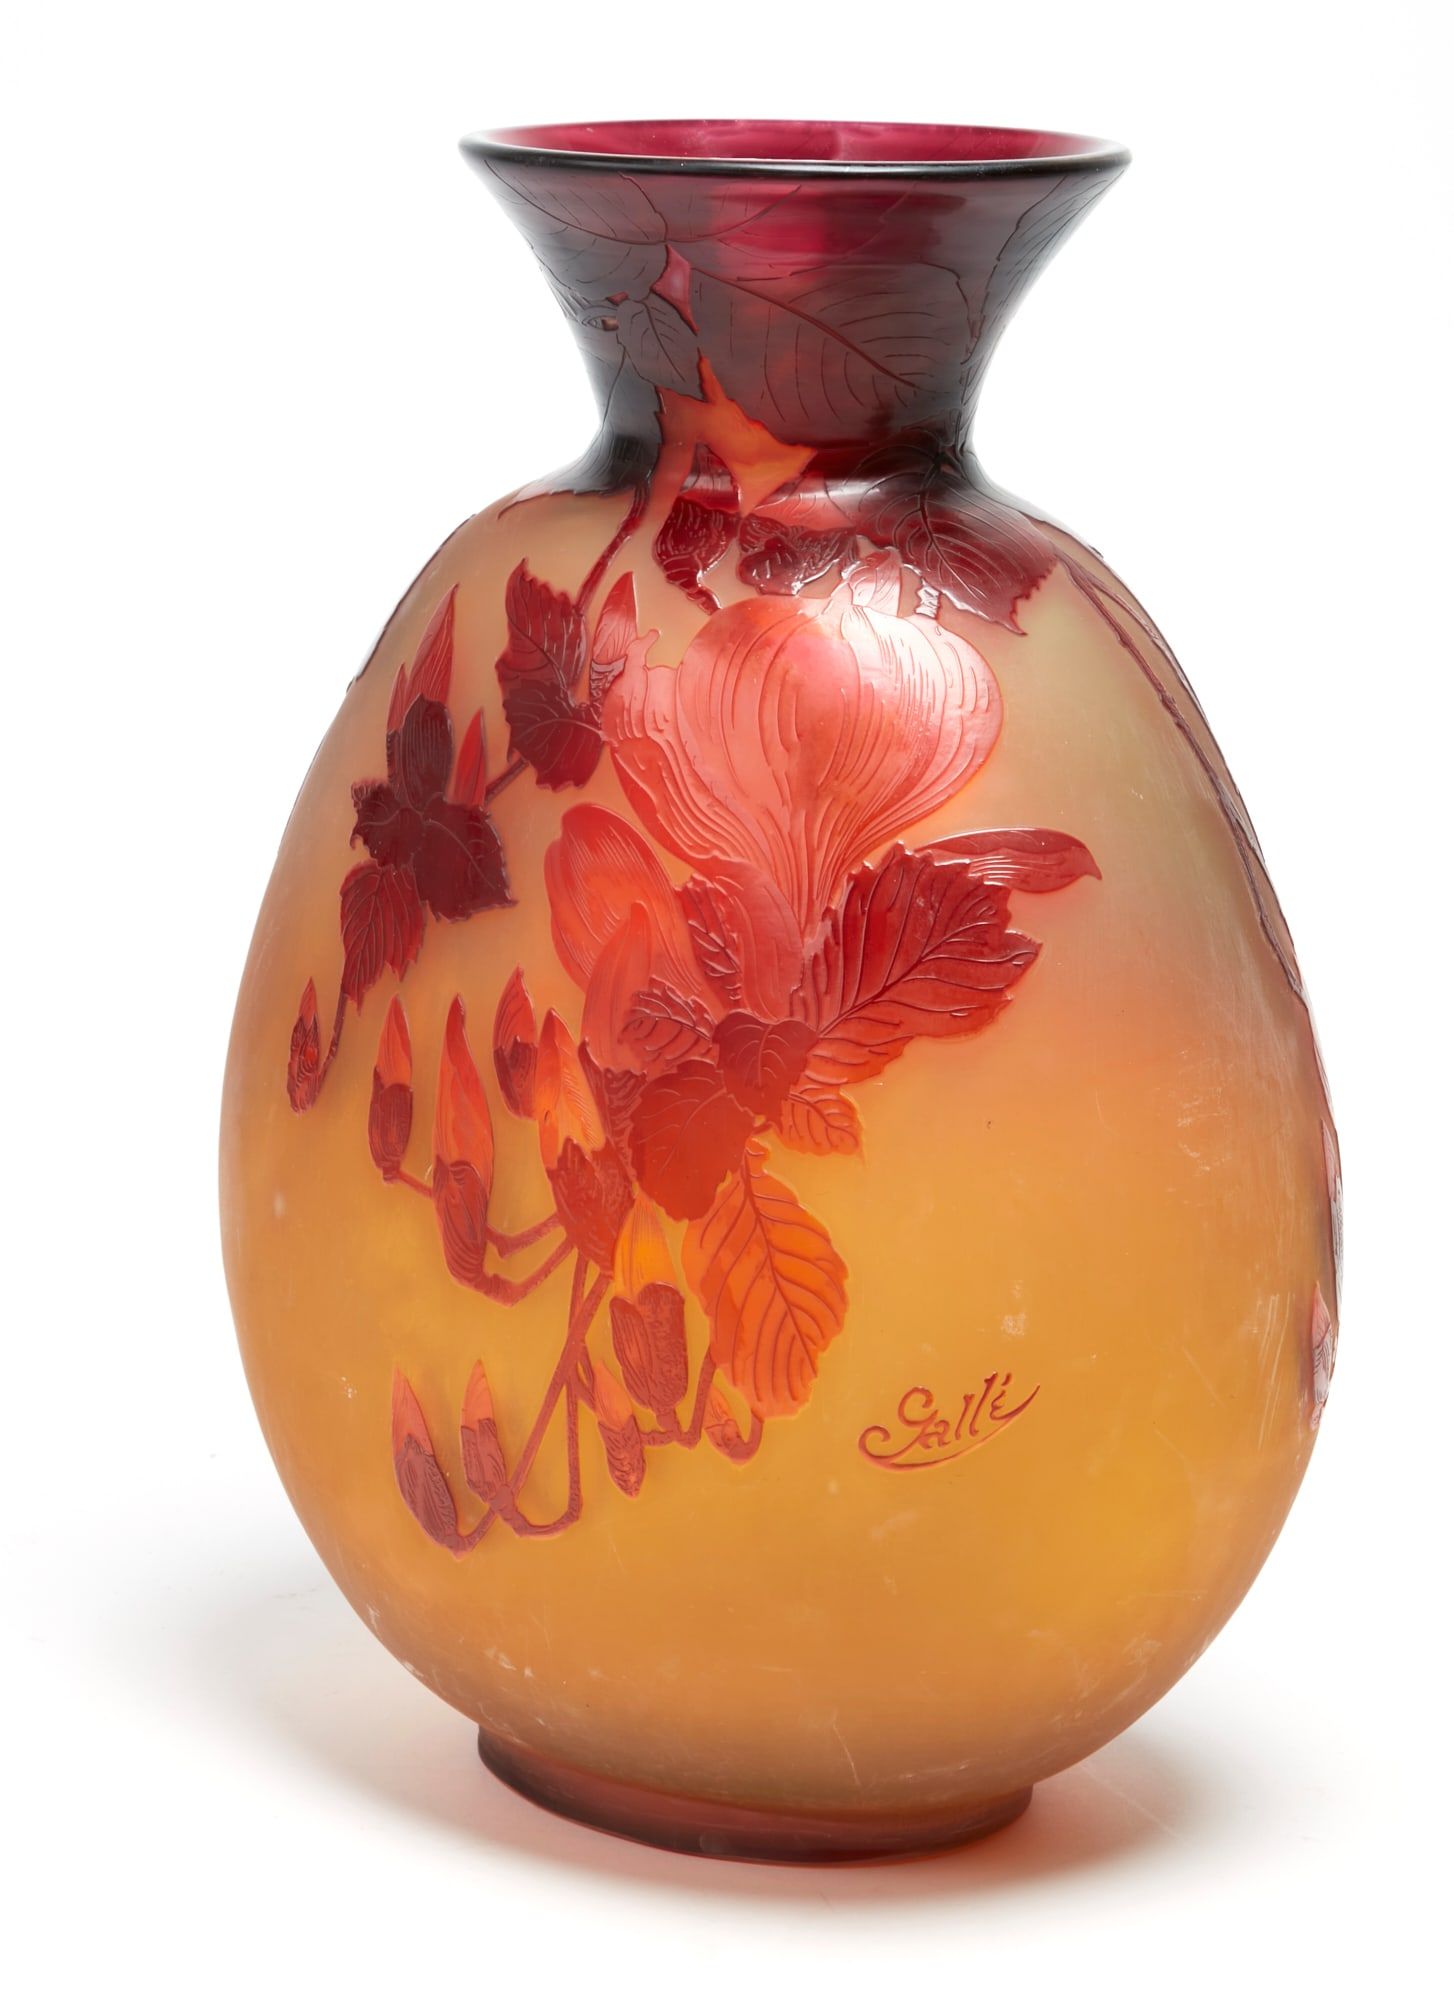 A GALLE CAMEO GLASS VASEA Galle